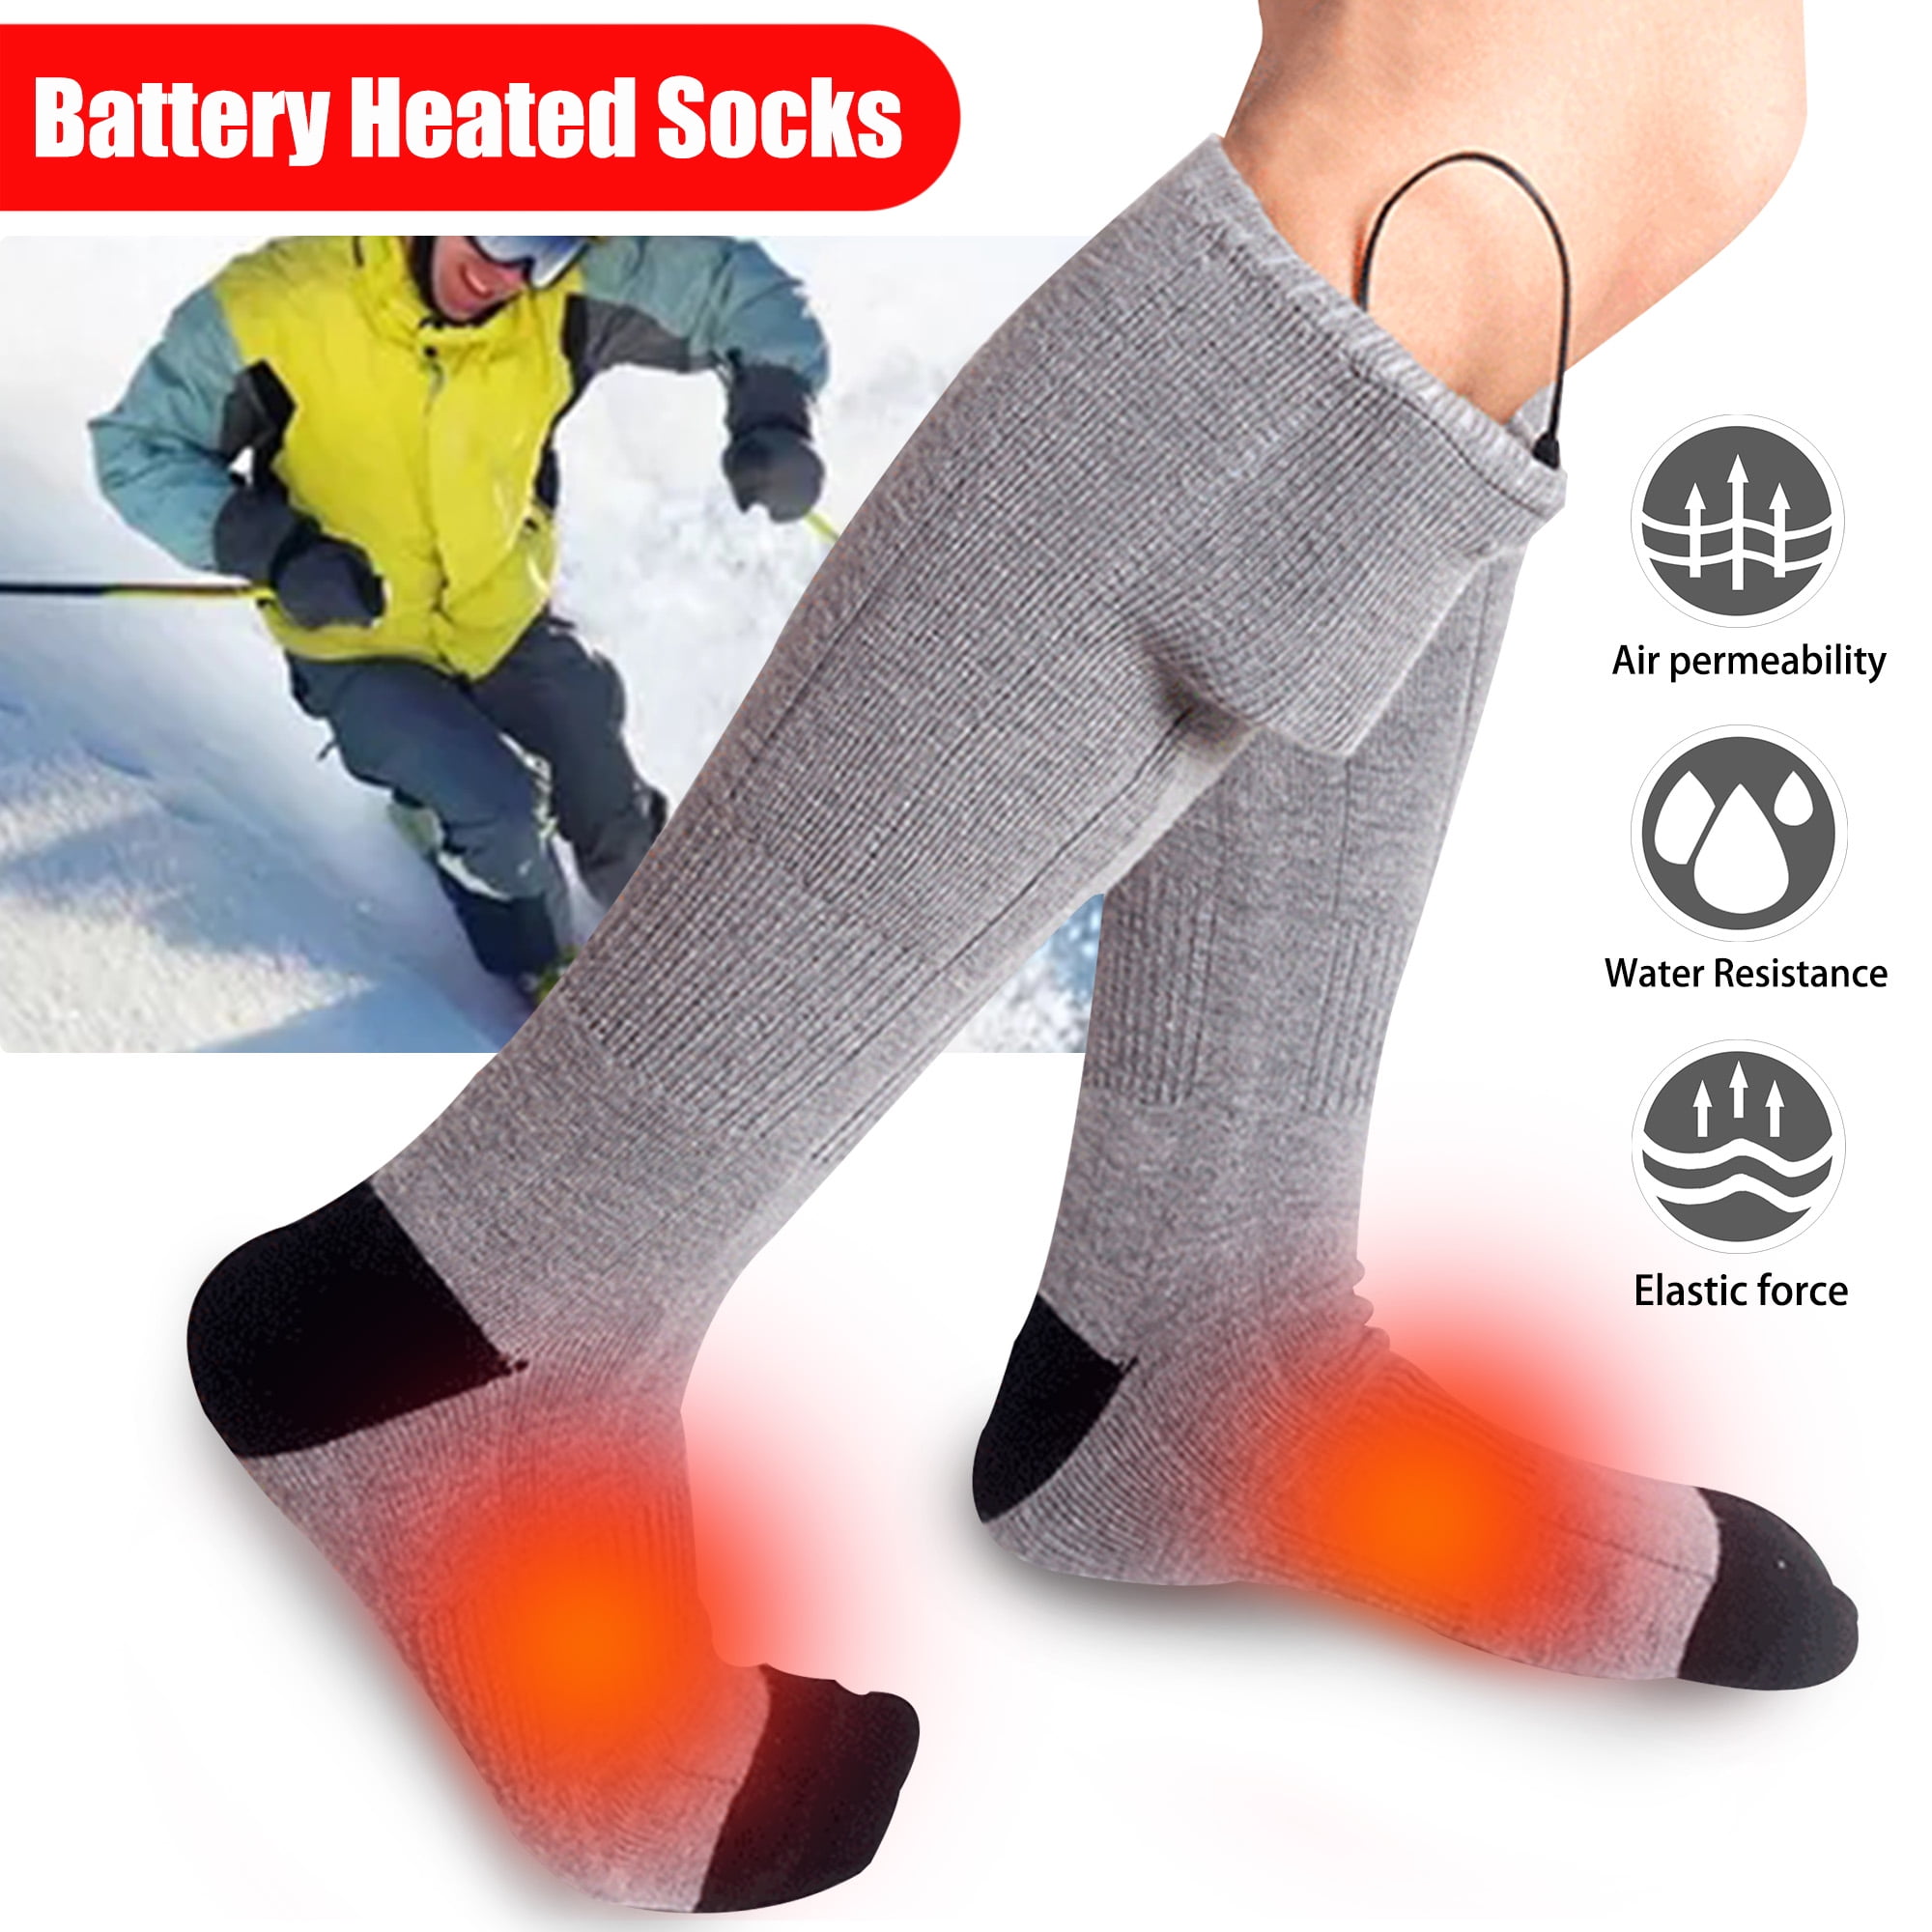 Upgraded Heated Socks for Outdoor Sport Up to 18 Hours of Heat Heated Socks Electric Heating Socks for Men Women Heating Socks Rechargeable Battery Powered with 4500mAh Large Capacity Battery